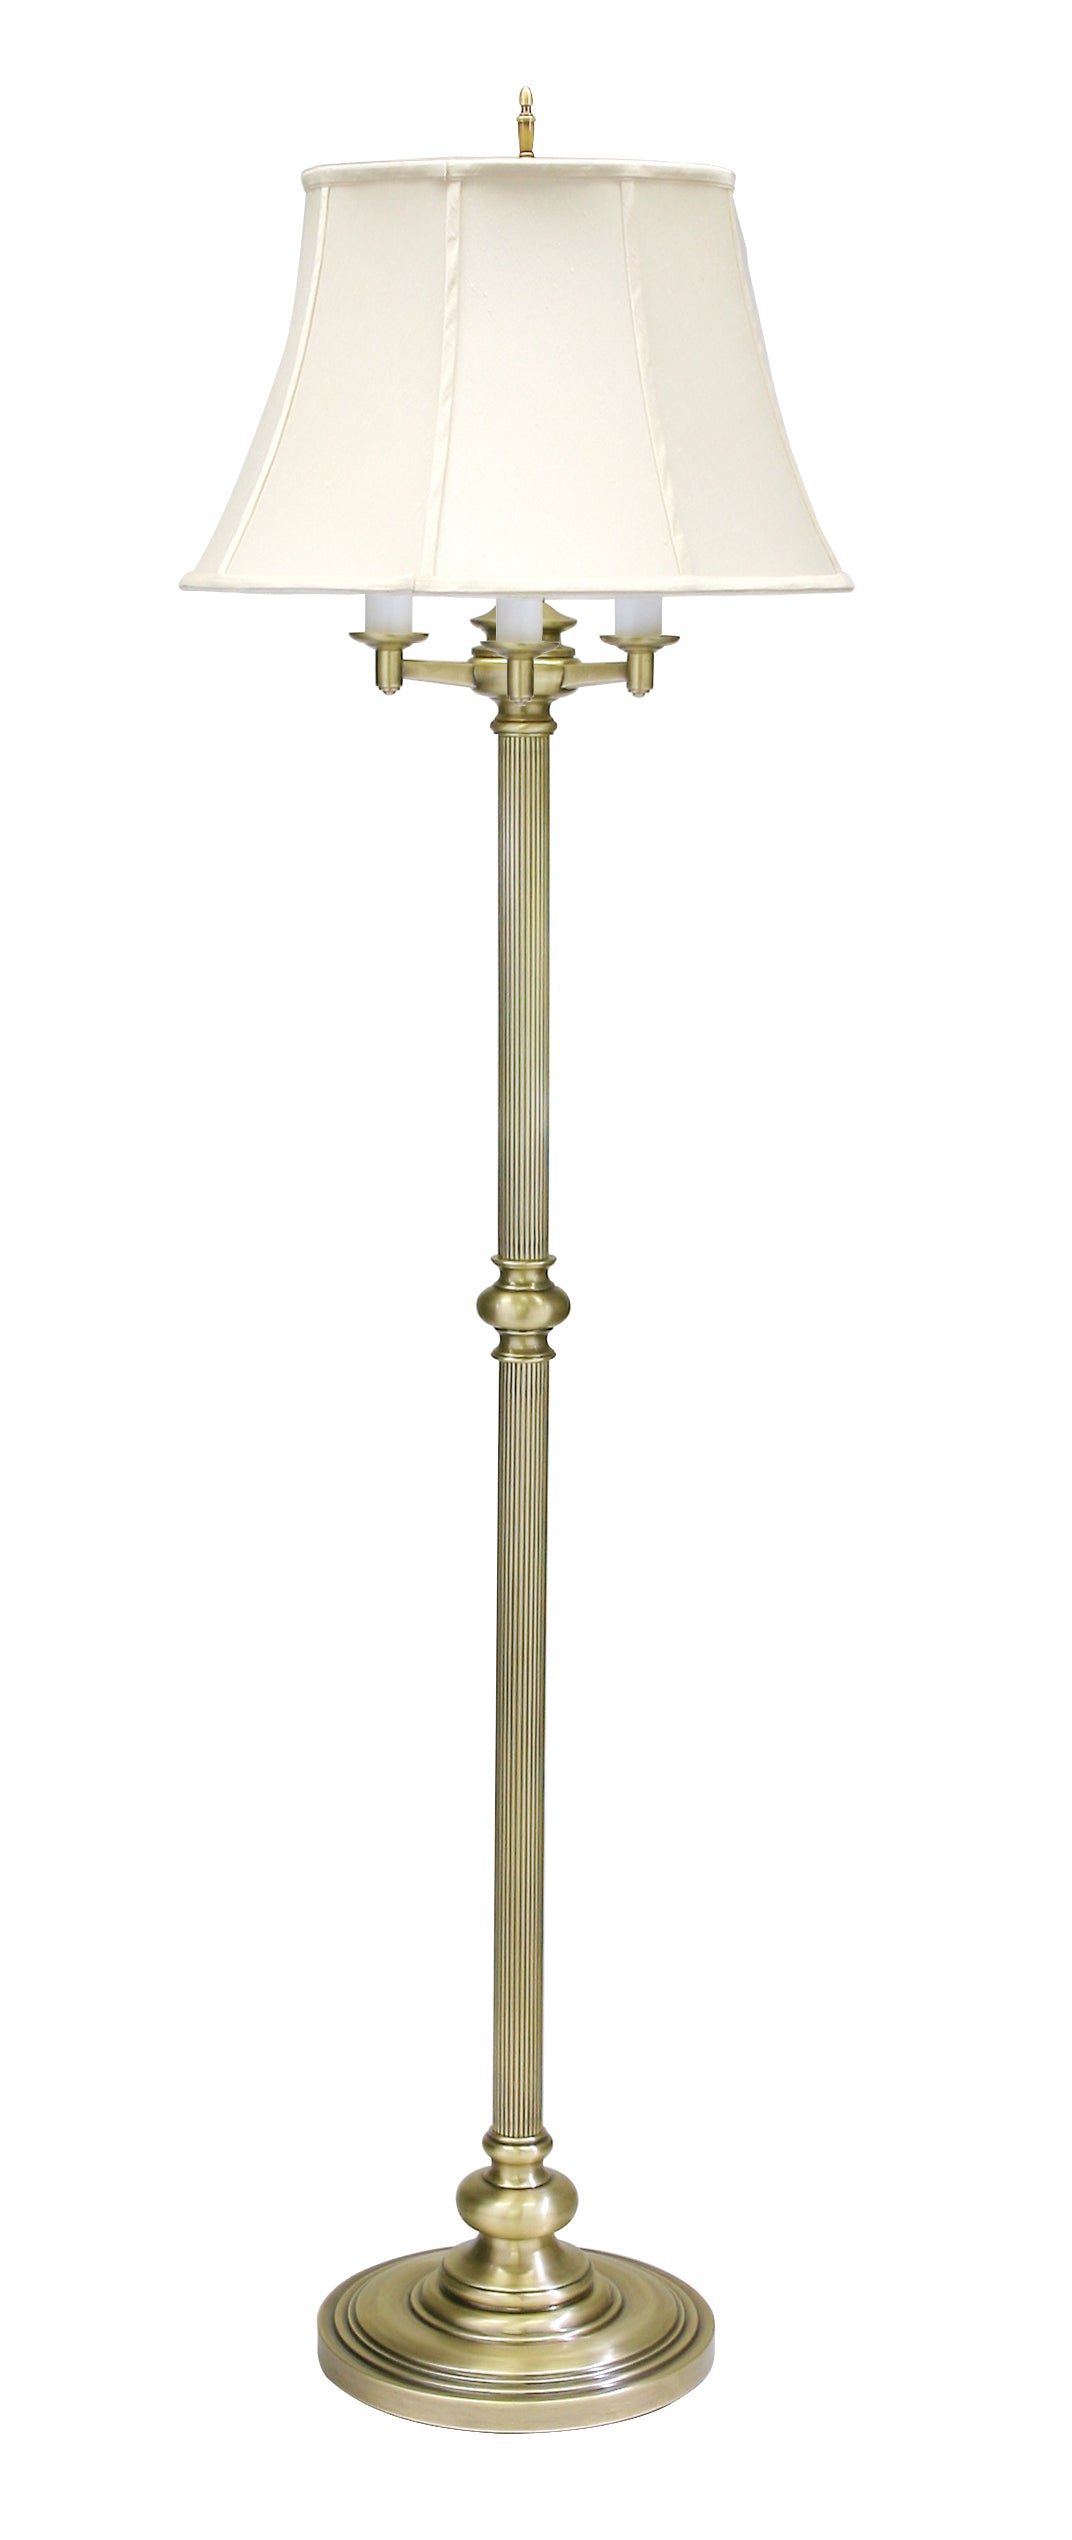 House of Troy Newport 66" Antique Brass 6-Way Floor Lamp N603-AB